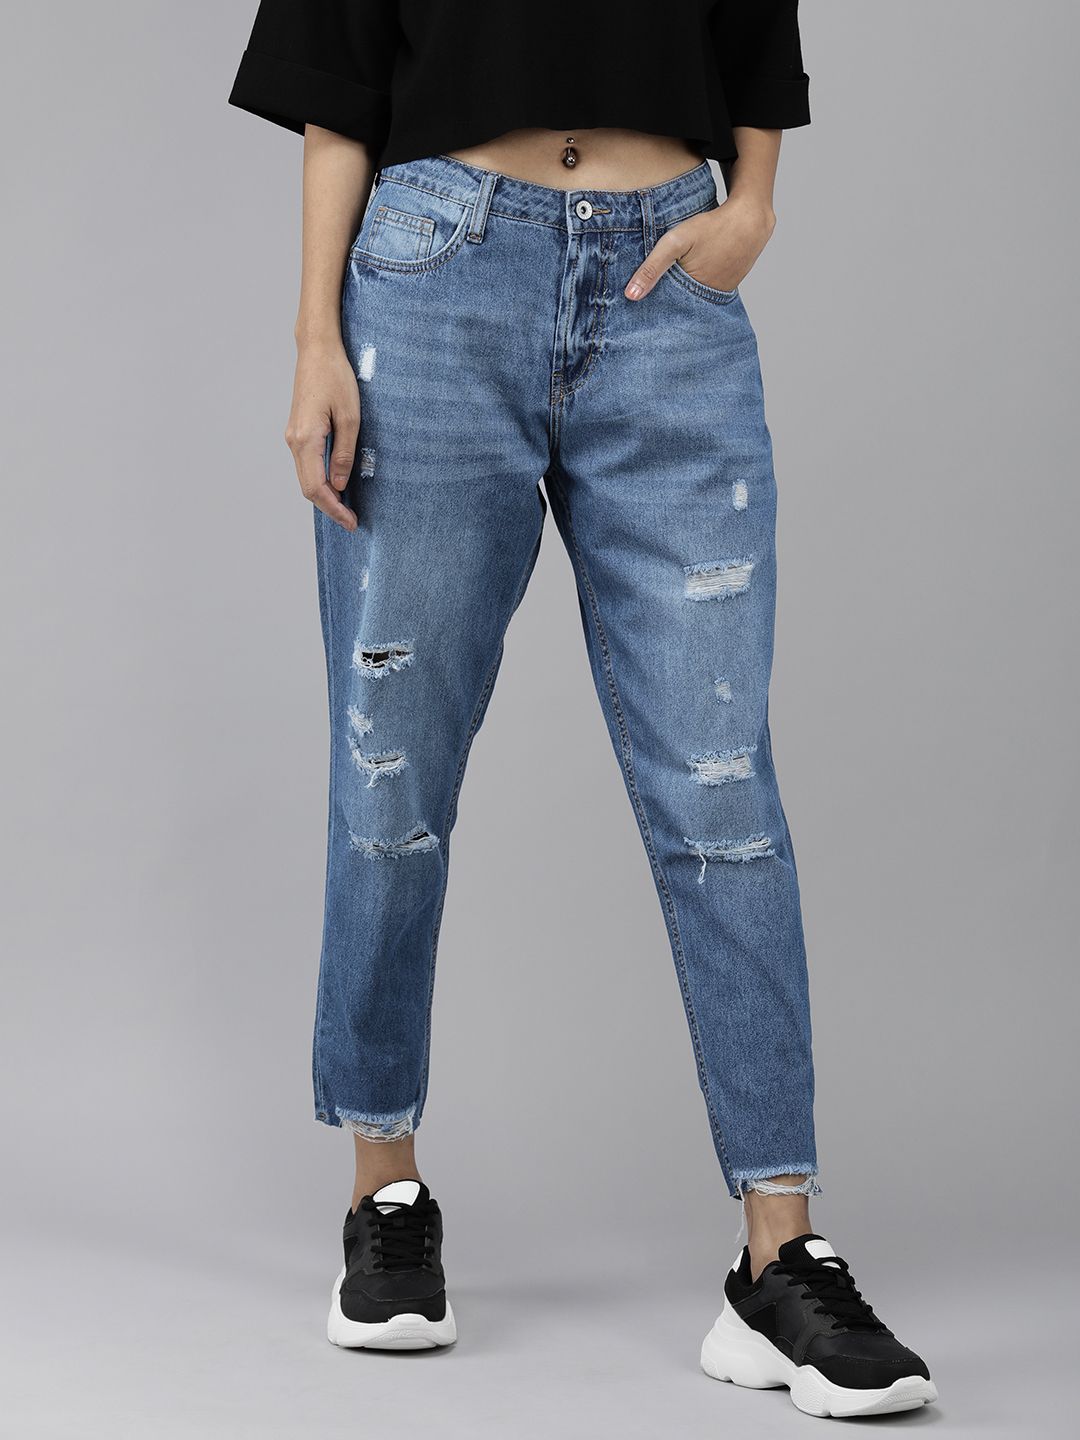 Roadster Women Indigo Mildly Distressed Light Fade Stretchable Casual Jeans Price in India